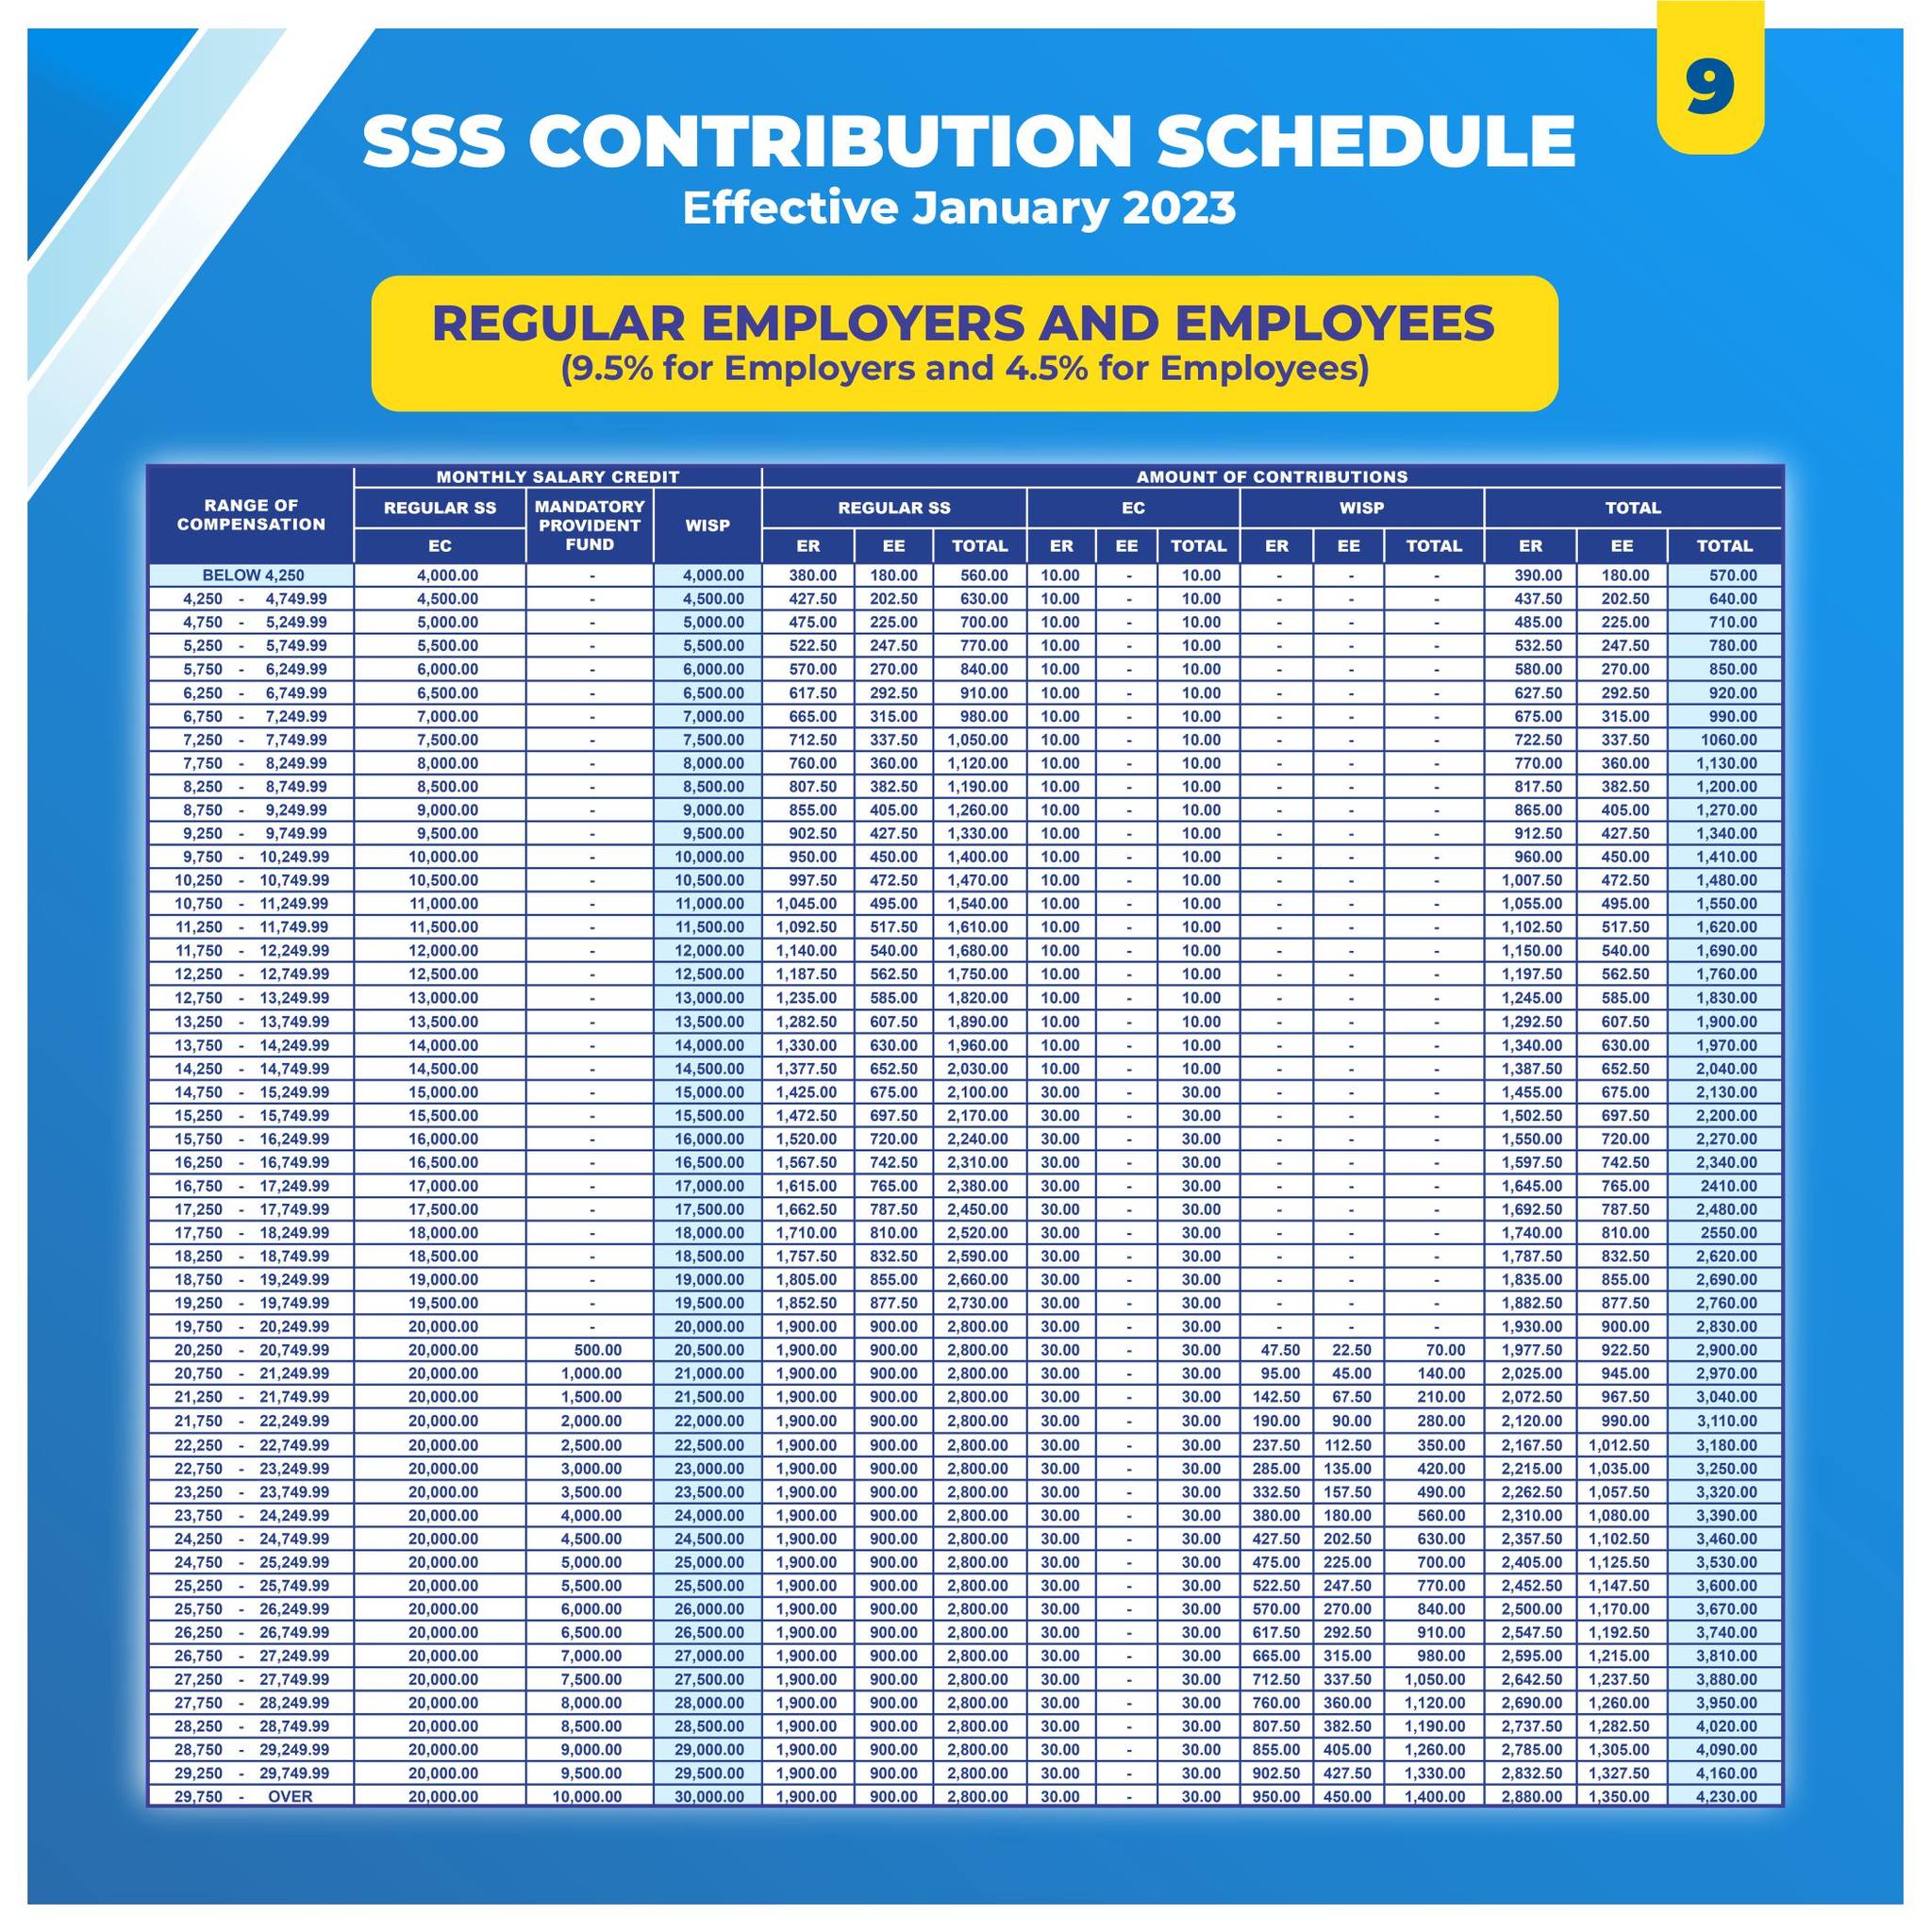 wisp sss contributions - for regular employers and employees